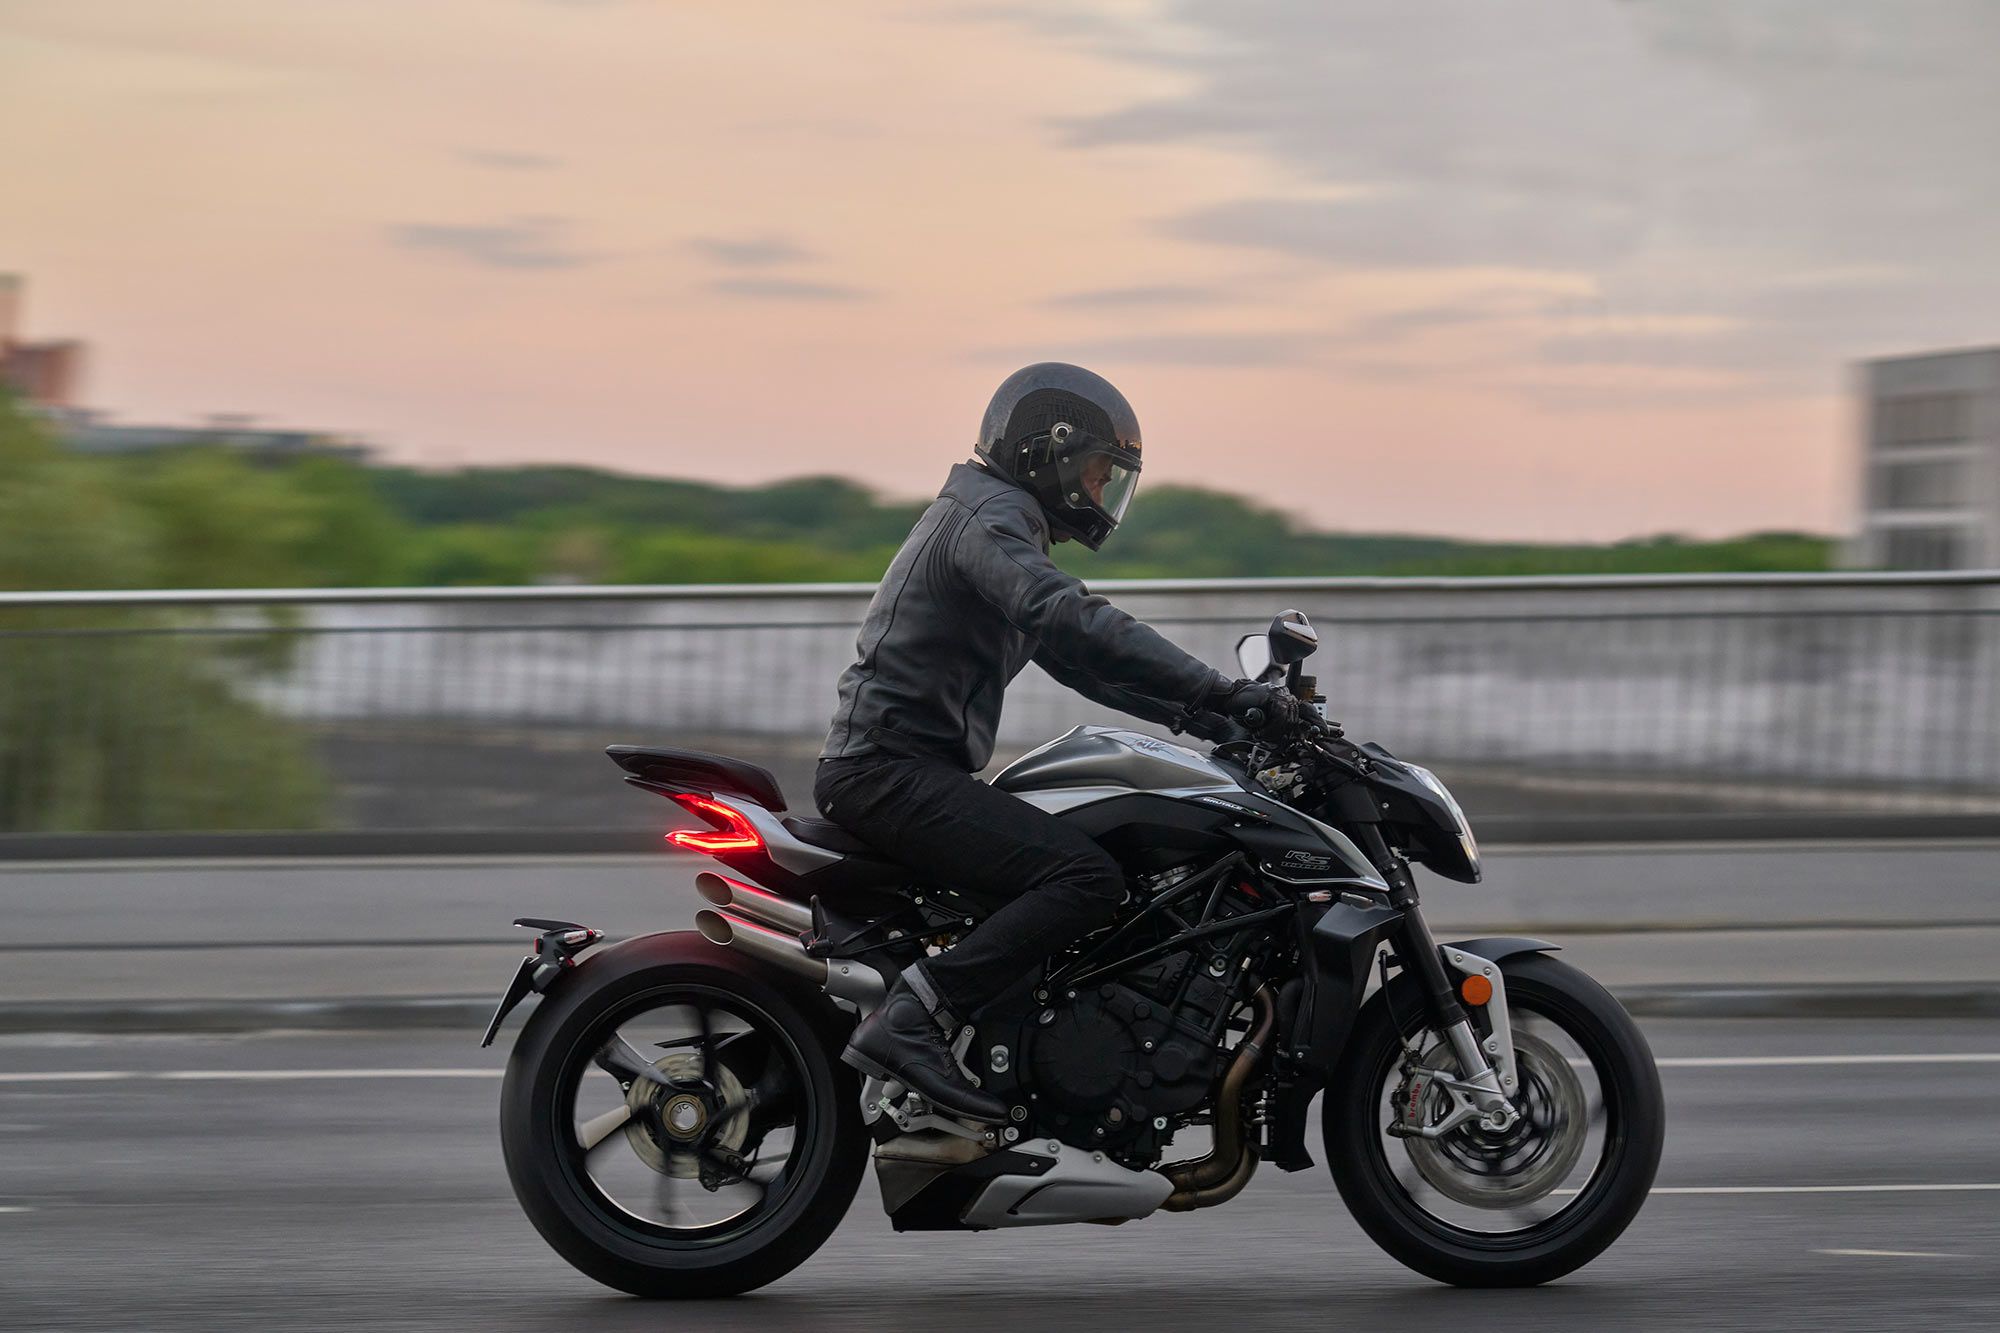 The new MV Agusta Brutale 1000 RS is almost identical to the RR.